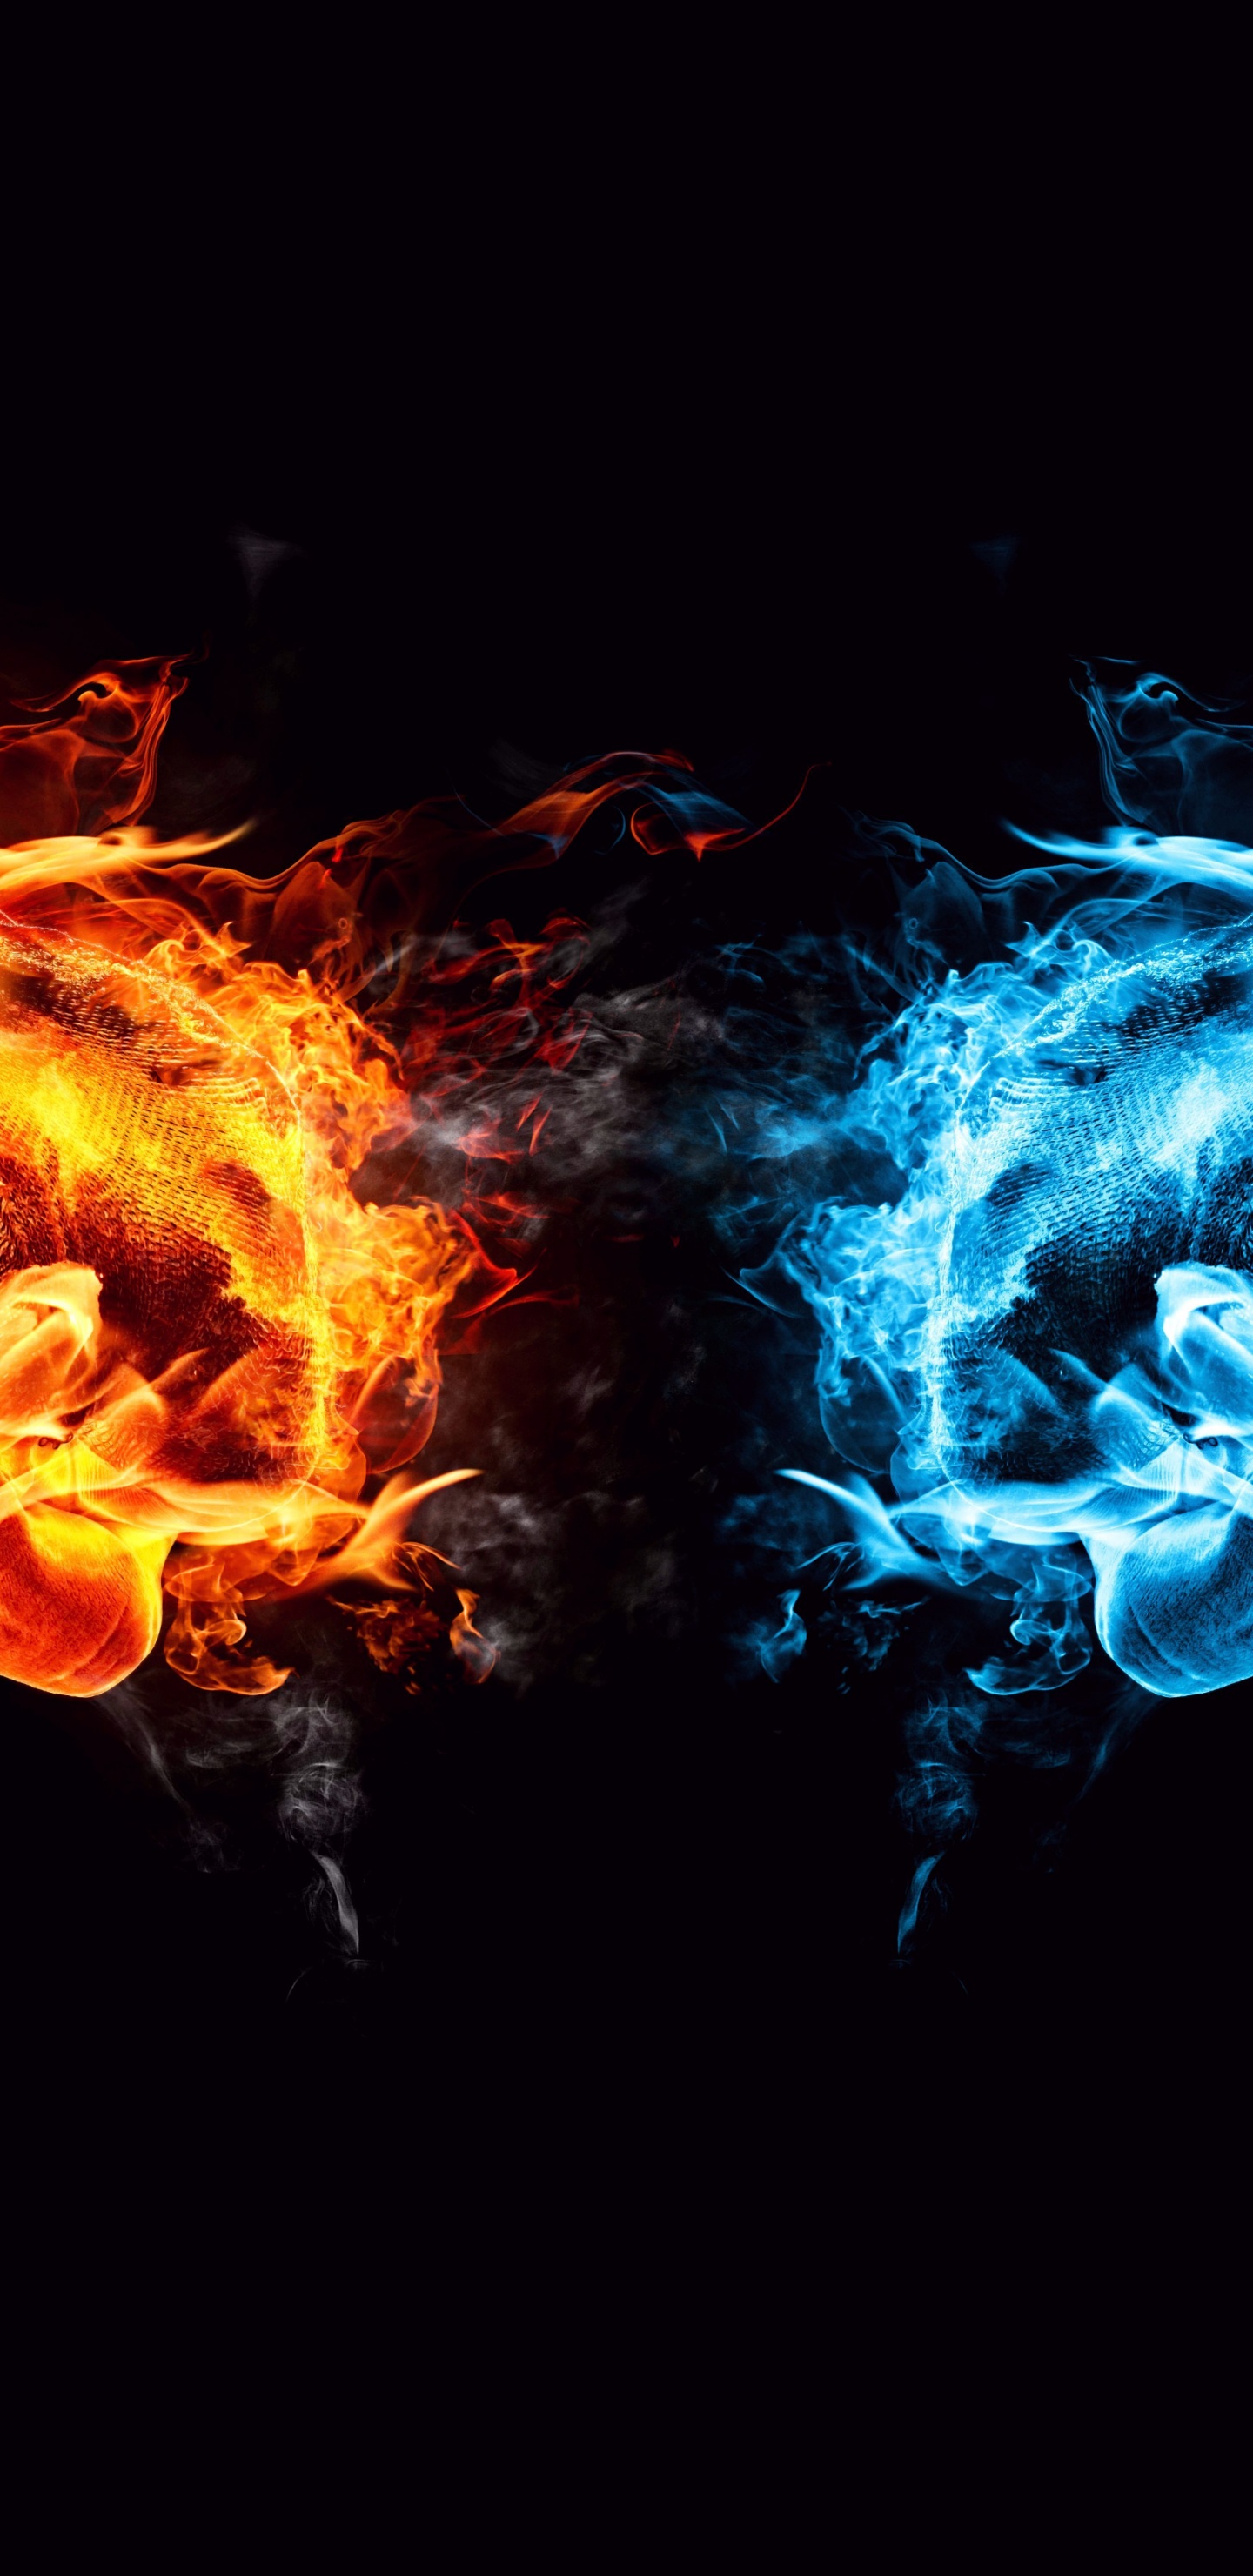 Blue and Orange Flame Illustration. Wallpaper in 1440x2960 Resolution